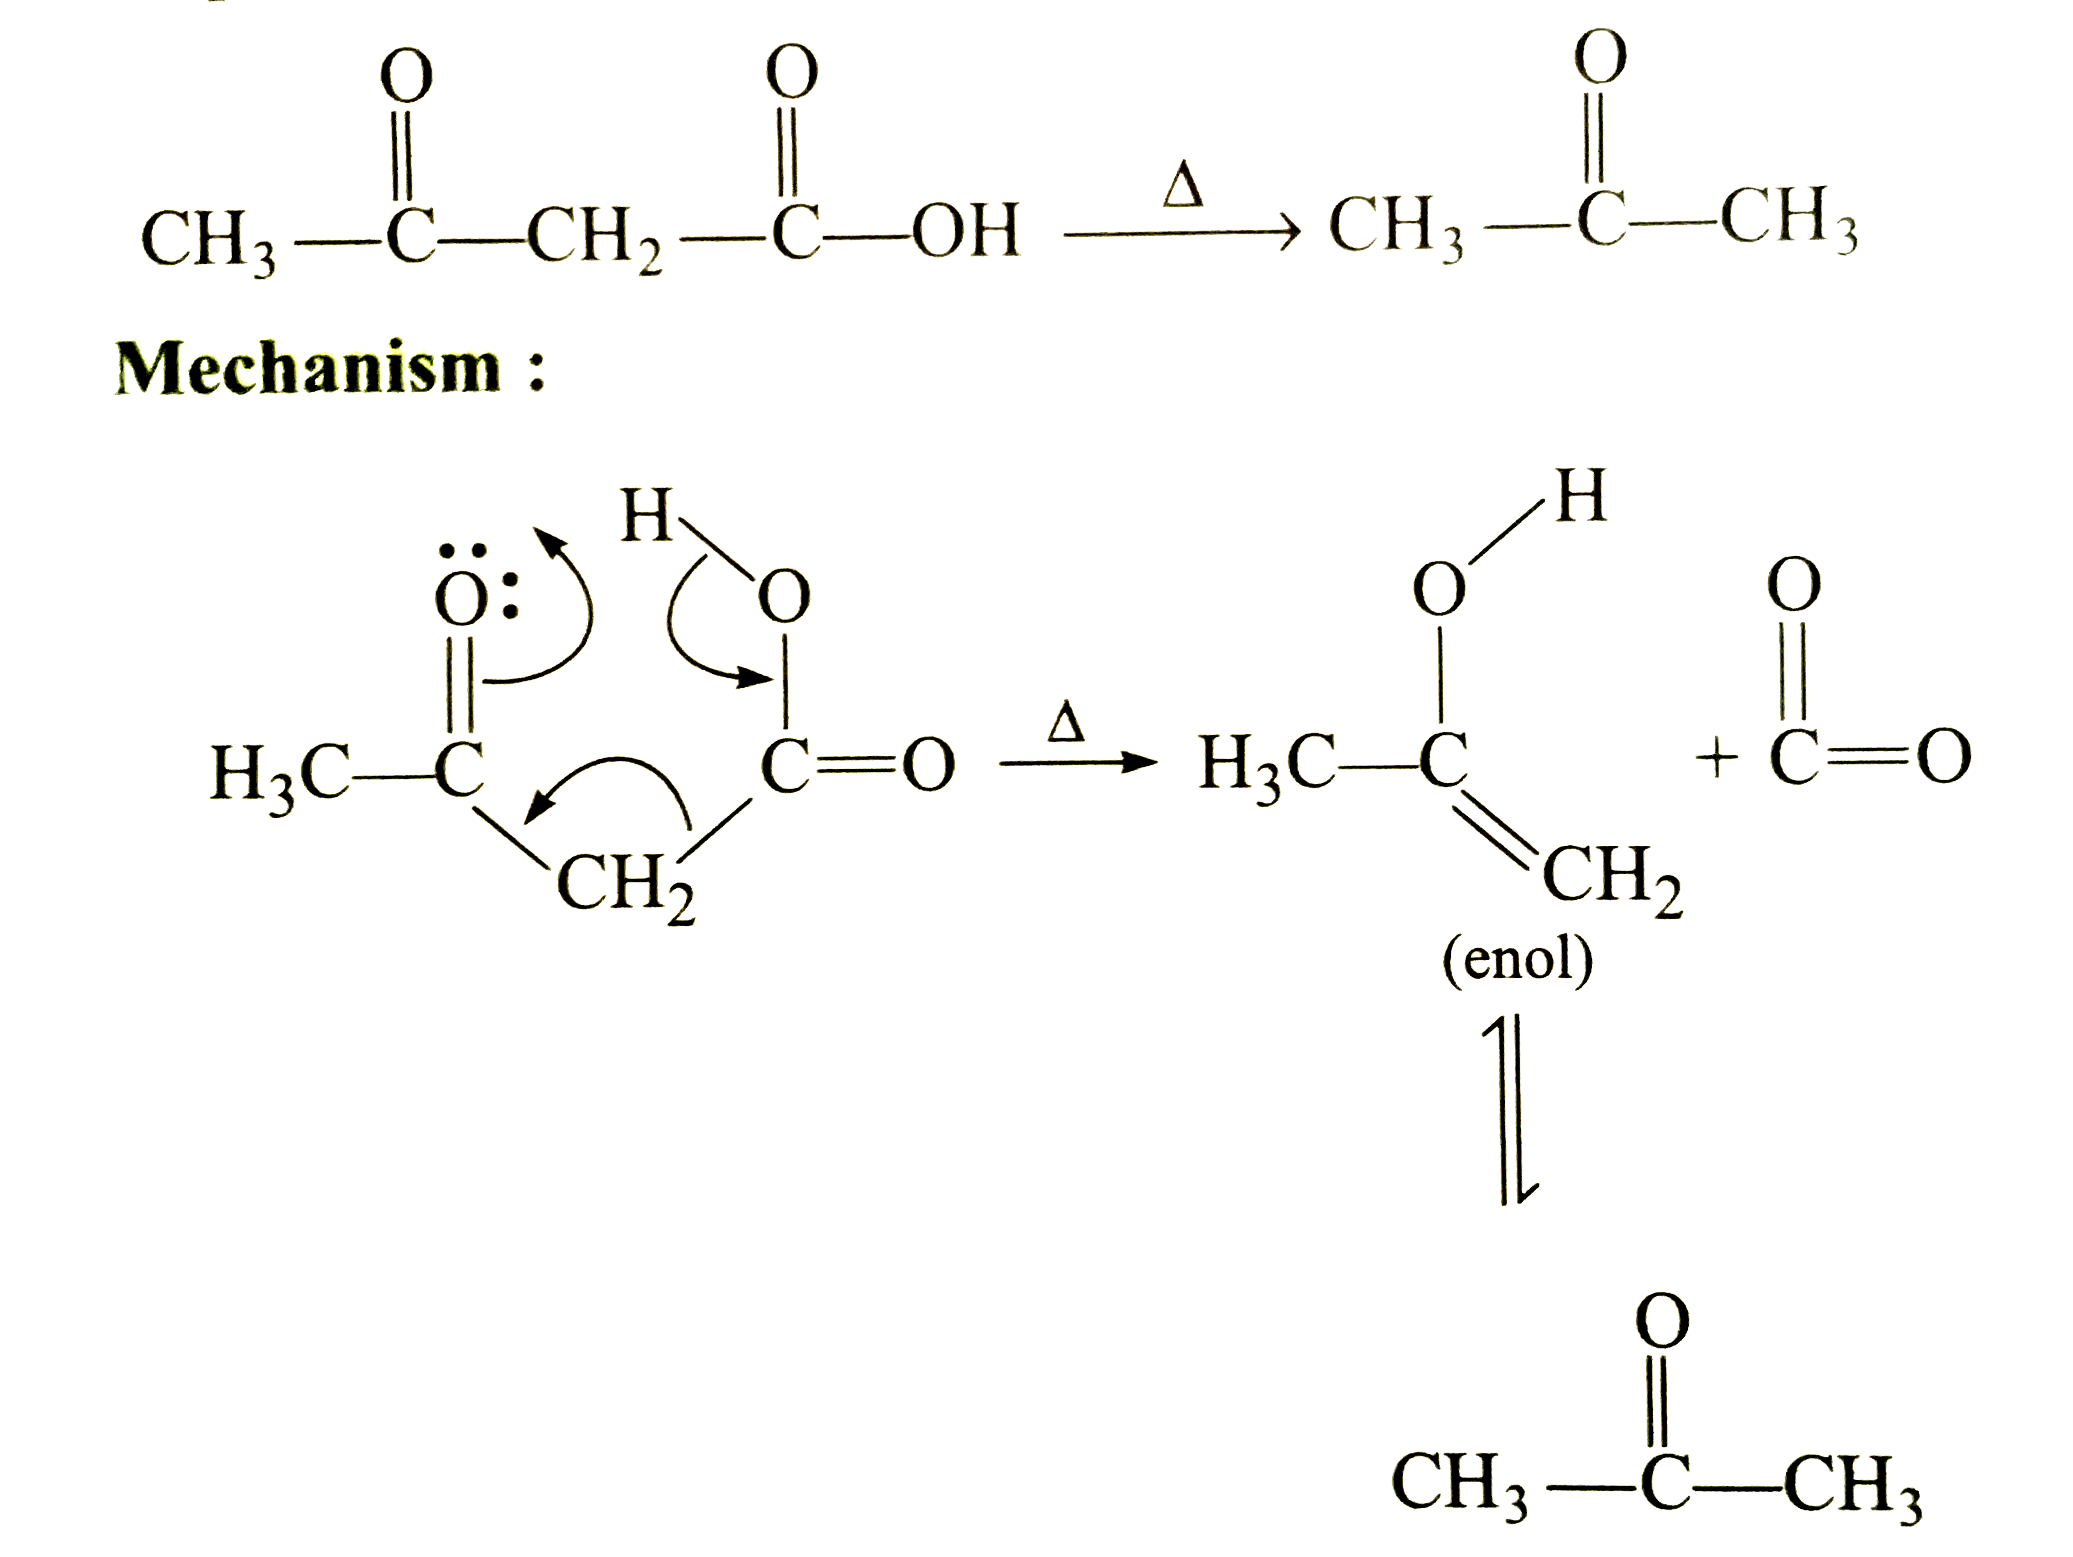 The decarboxylation of beta-ketoacids beta,gamma-unsaturated acid an germinal diacid proceed through the fomultlon of cyclic transition state in presence of heat.